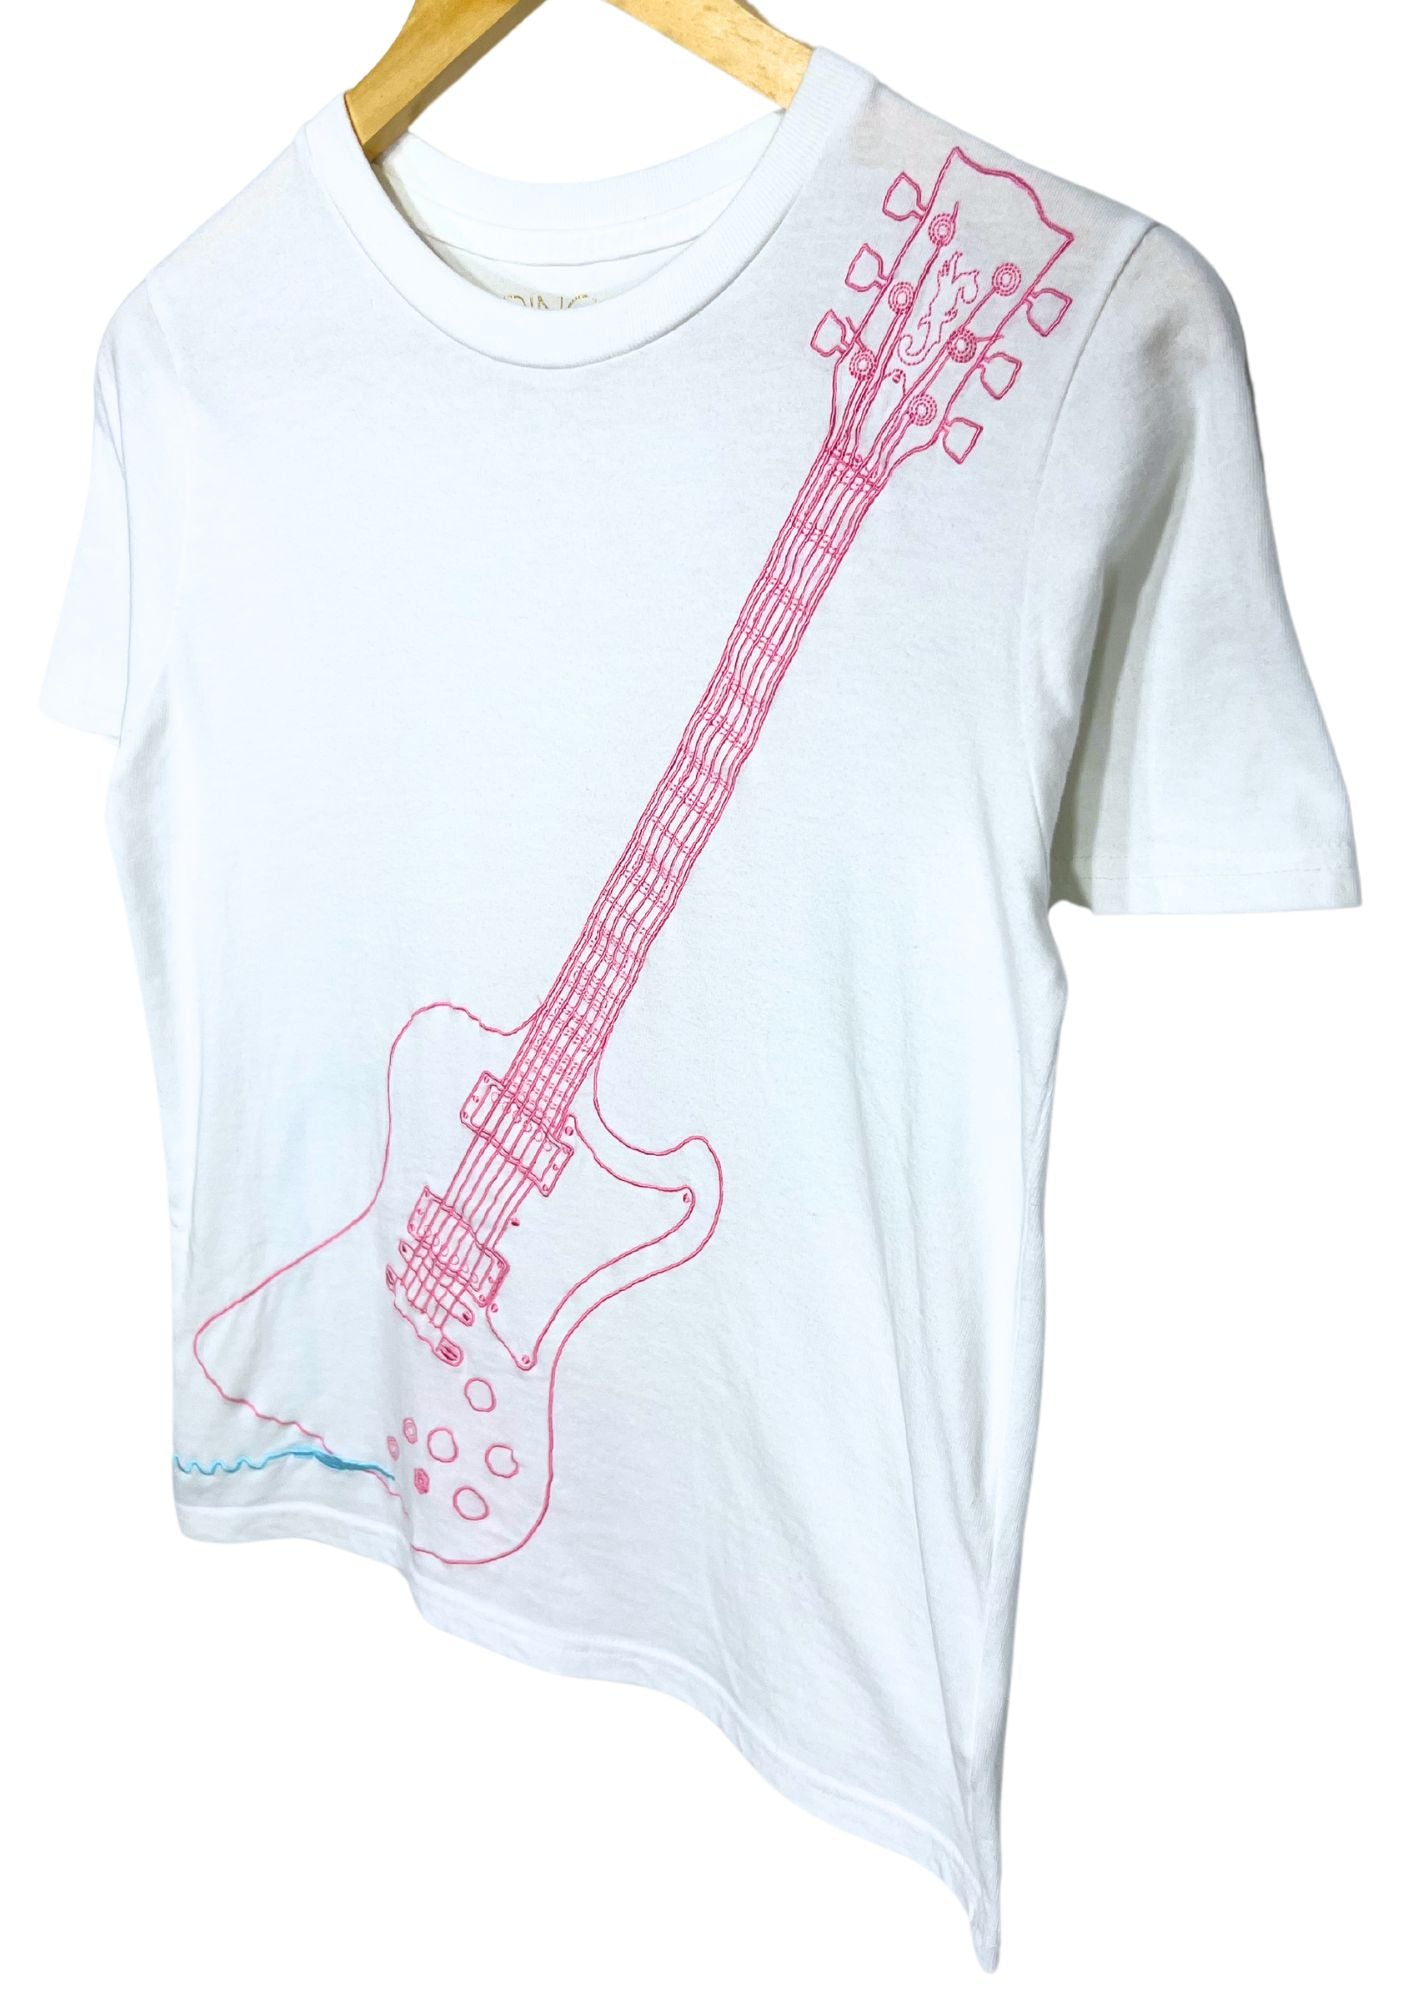 2014 SHEENA RINGO Ringo Expo 'Electric Guitar Counterattack'  Japanese Band Embroidered T-shirt